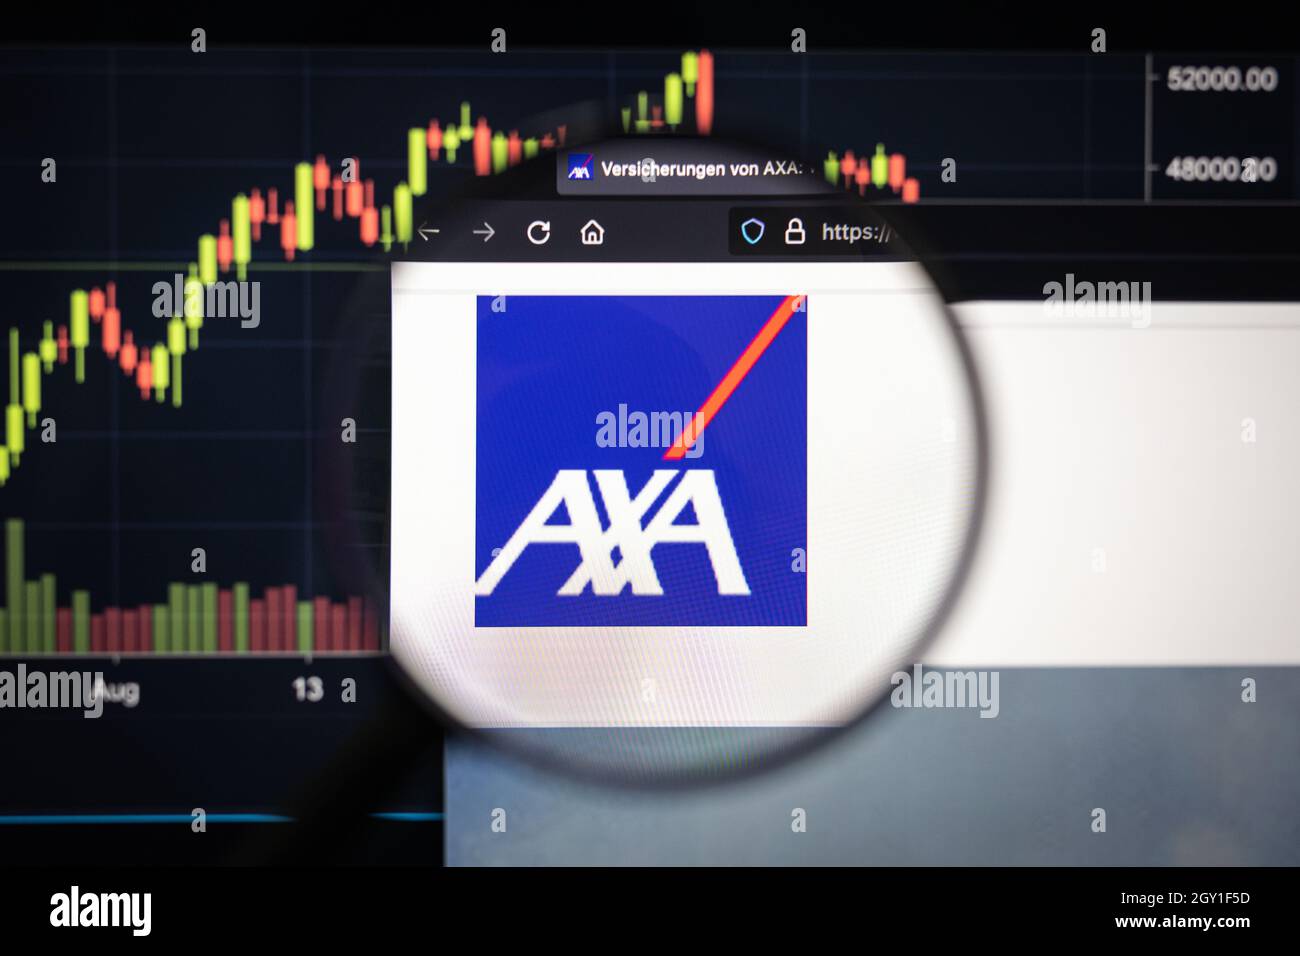 AXA company logo on a website with blurry stock market developments in the background, seen on a computer screen through a magnifying glass Stock Photo